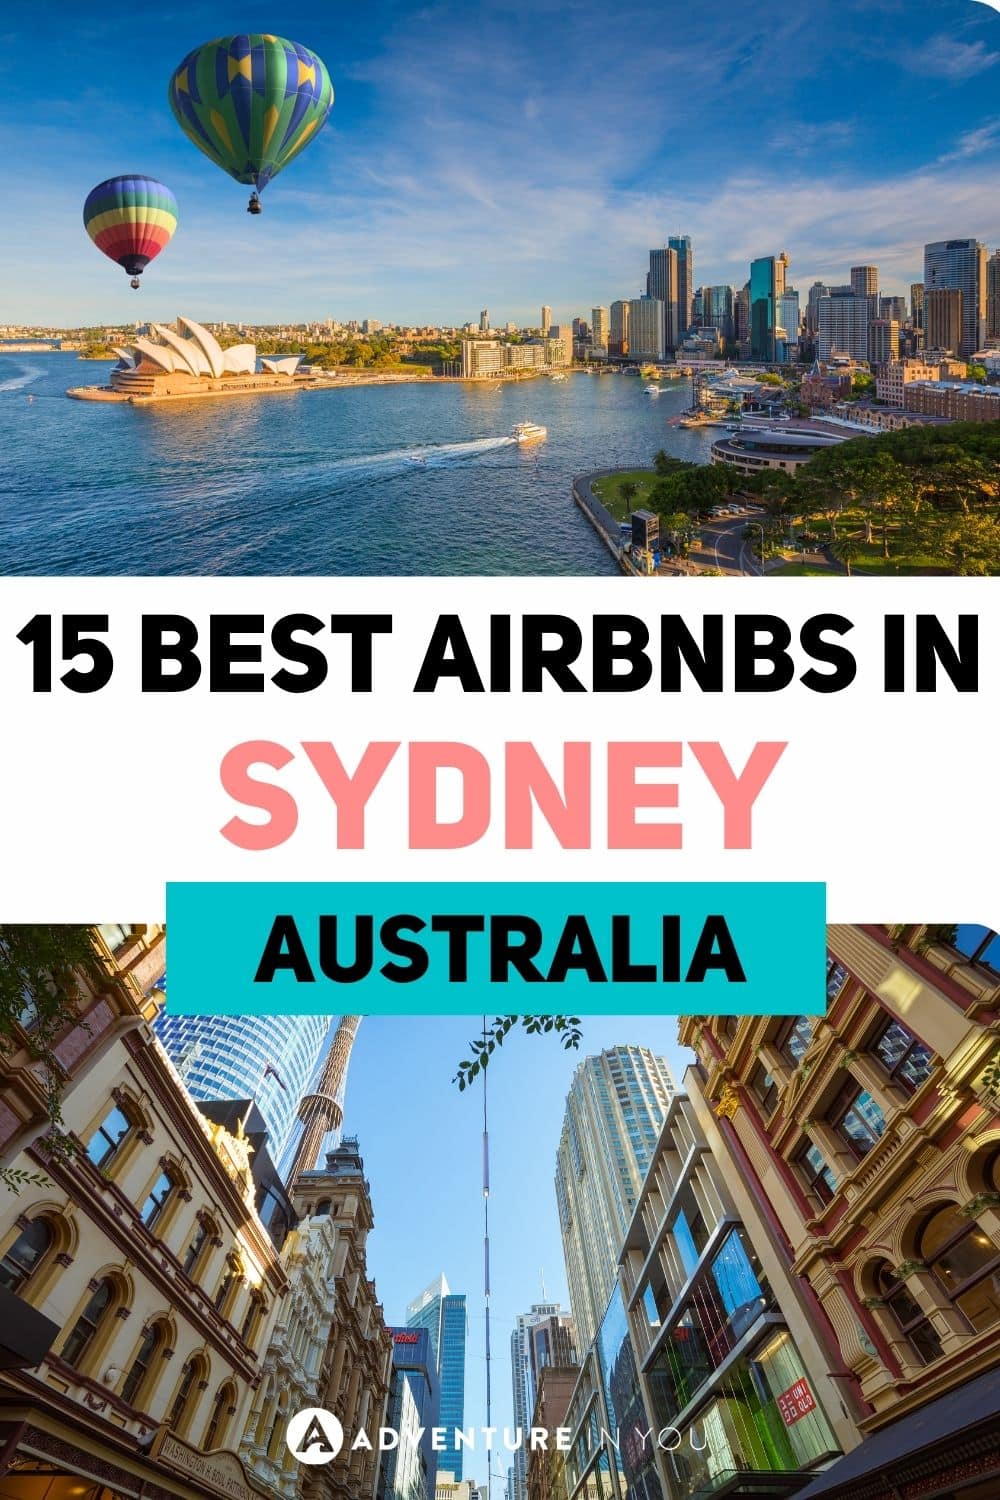 Airbnbs in Sydney | Looking for the best Airbnbs in Sydney Click here to see our top picks. #australia #sydney #wheretostayinsydney